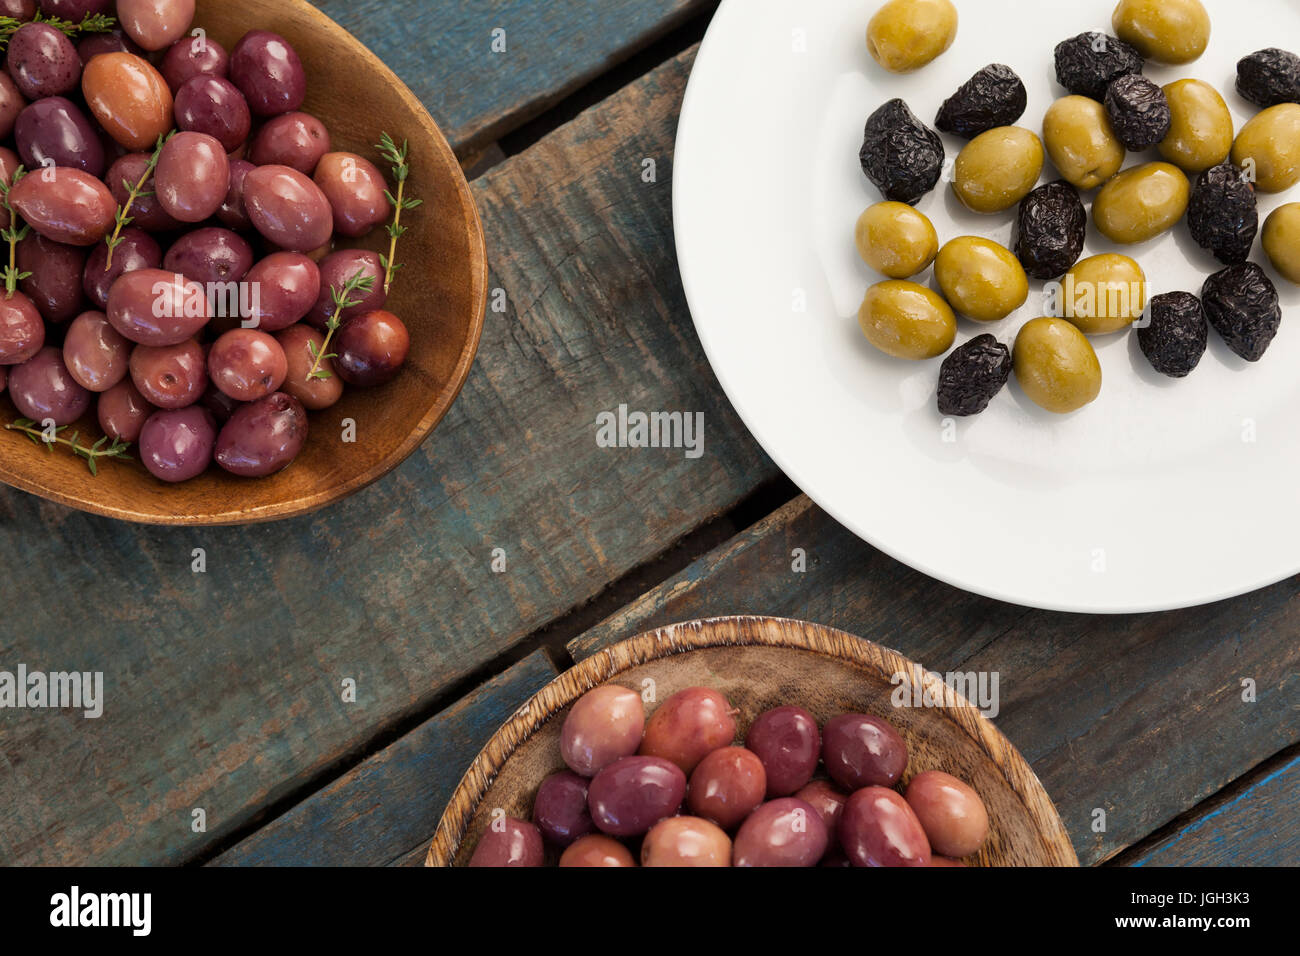 Overhead view of olives in bowls and plate on wooden table Stock Photo